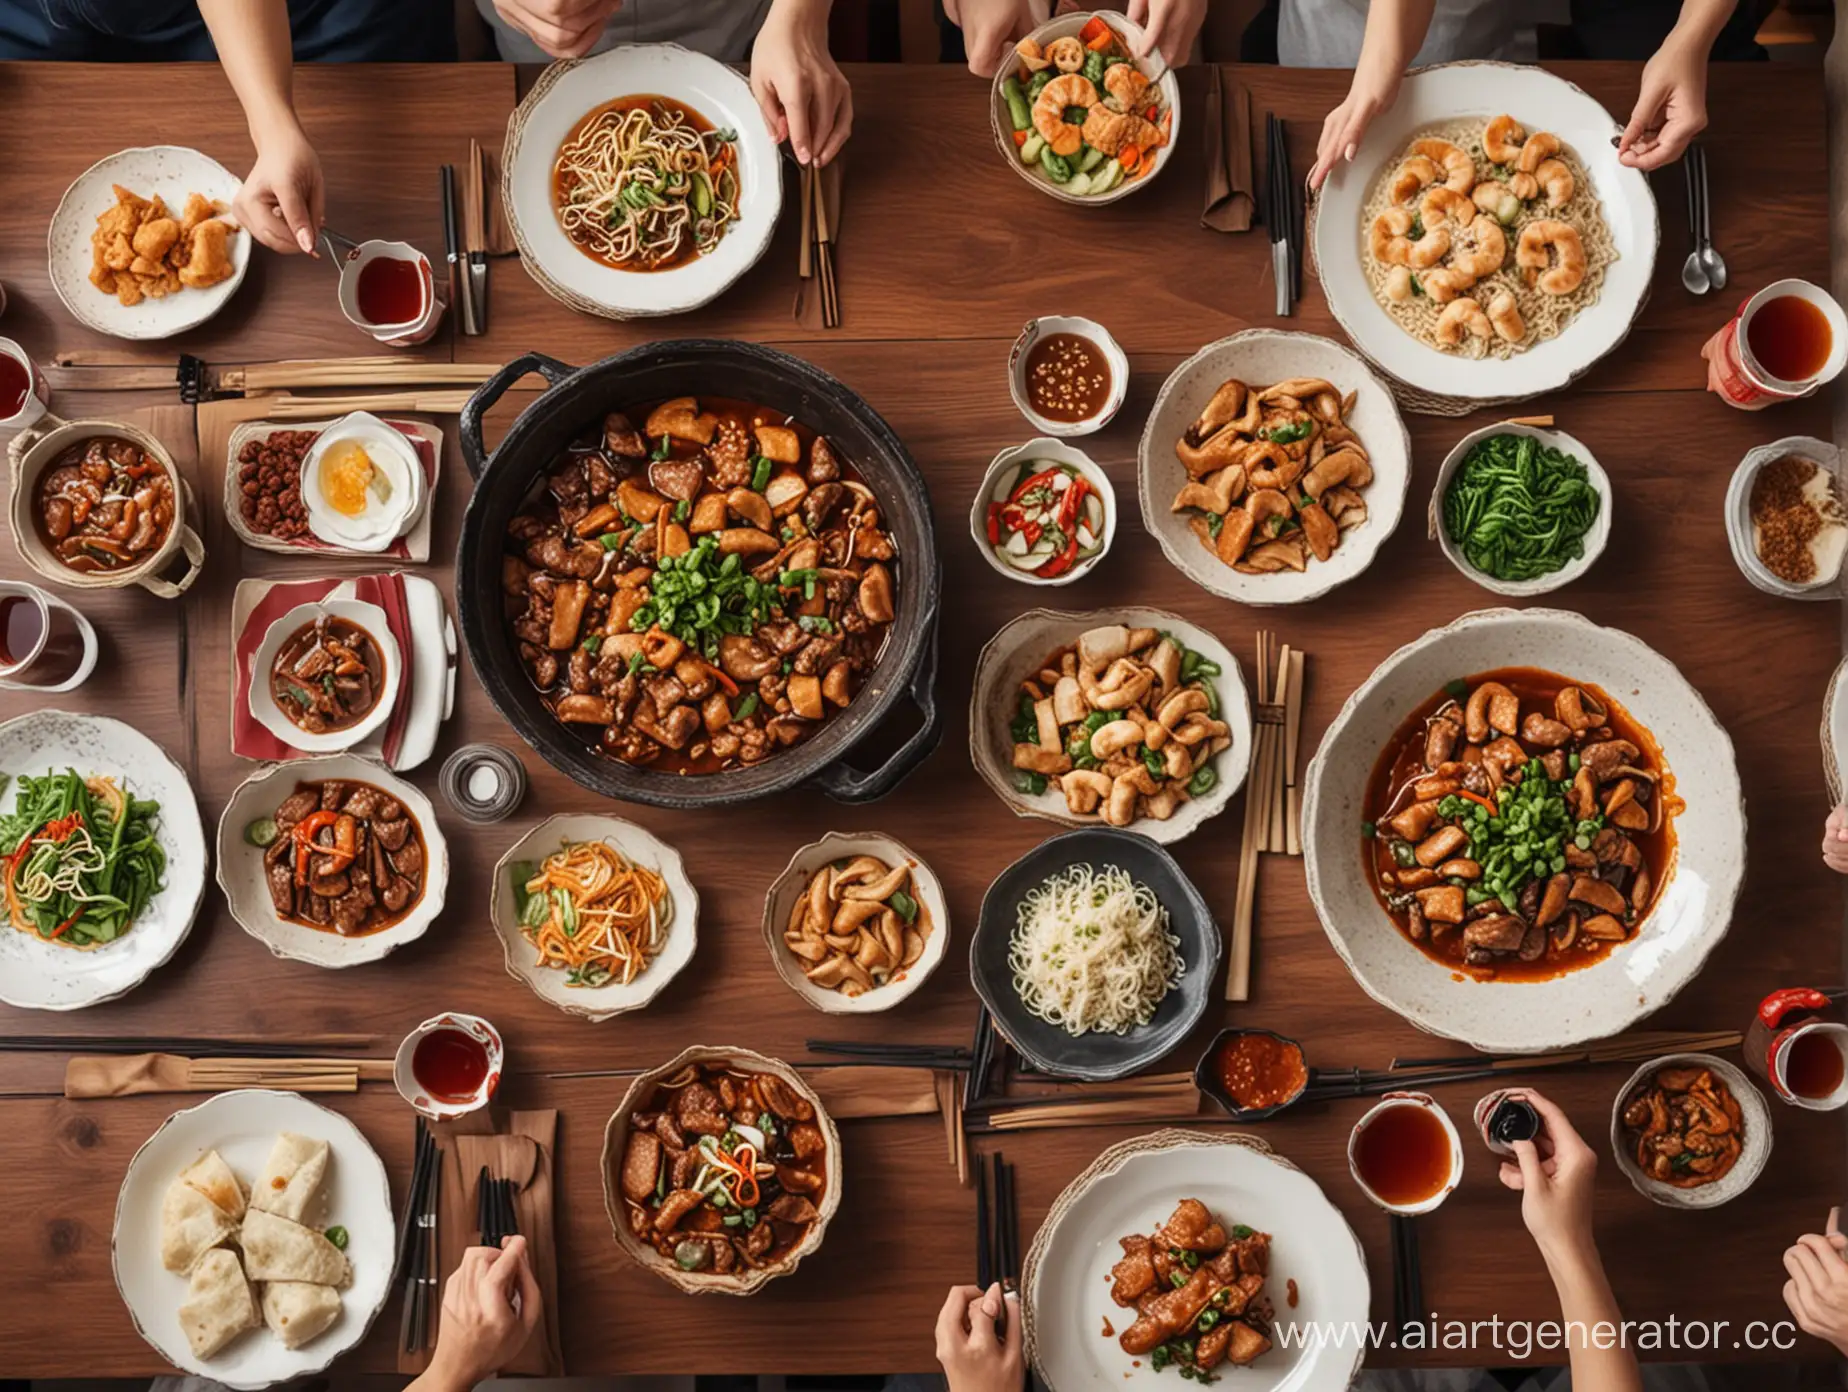 Authentic-Chinese-Cuisine-A-Festive-Family-Gathering-at-a-Traditional-Restaurant